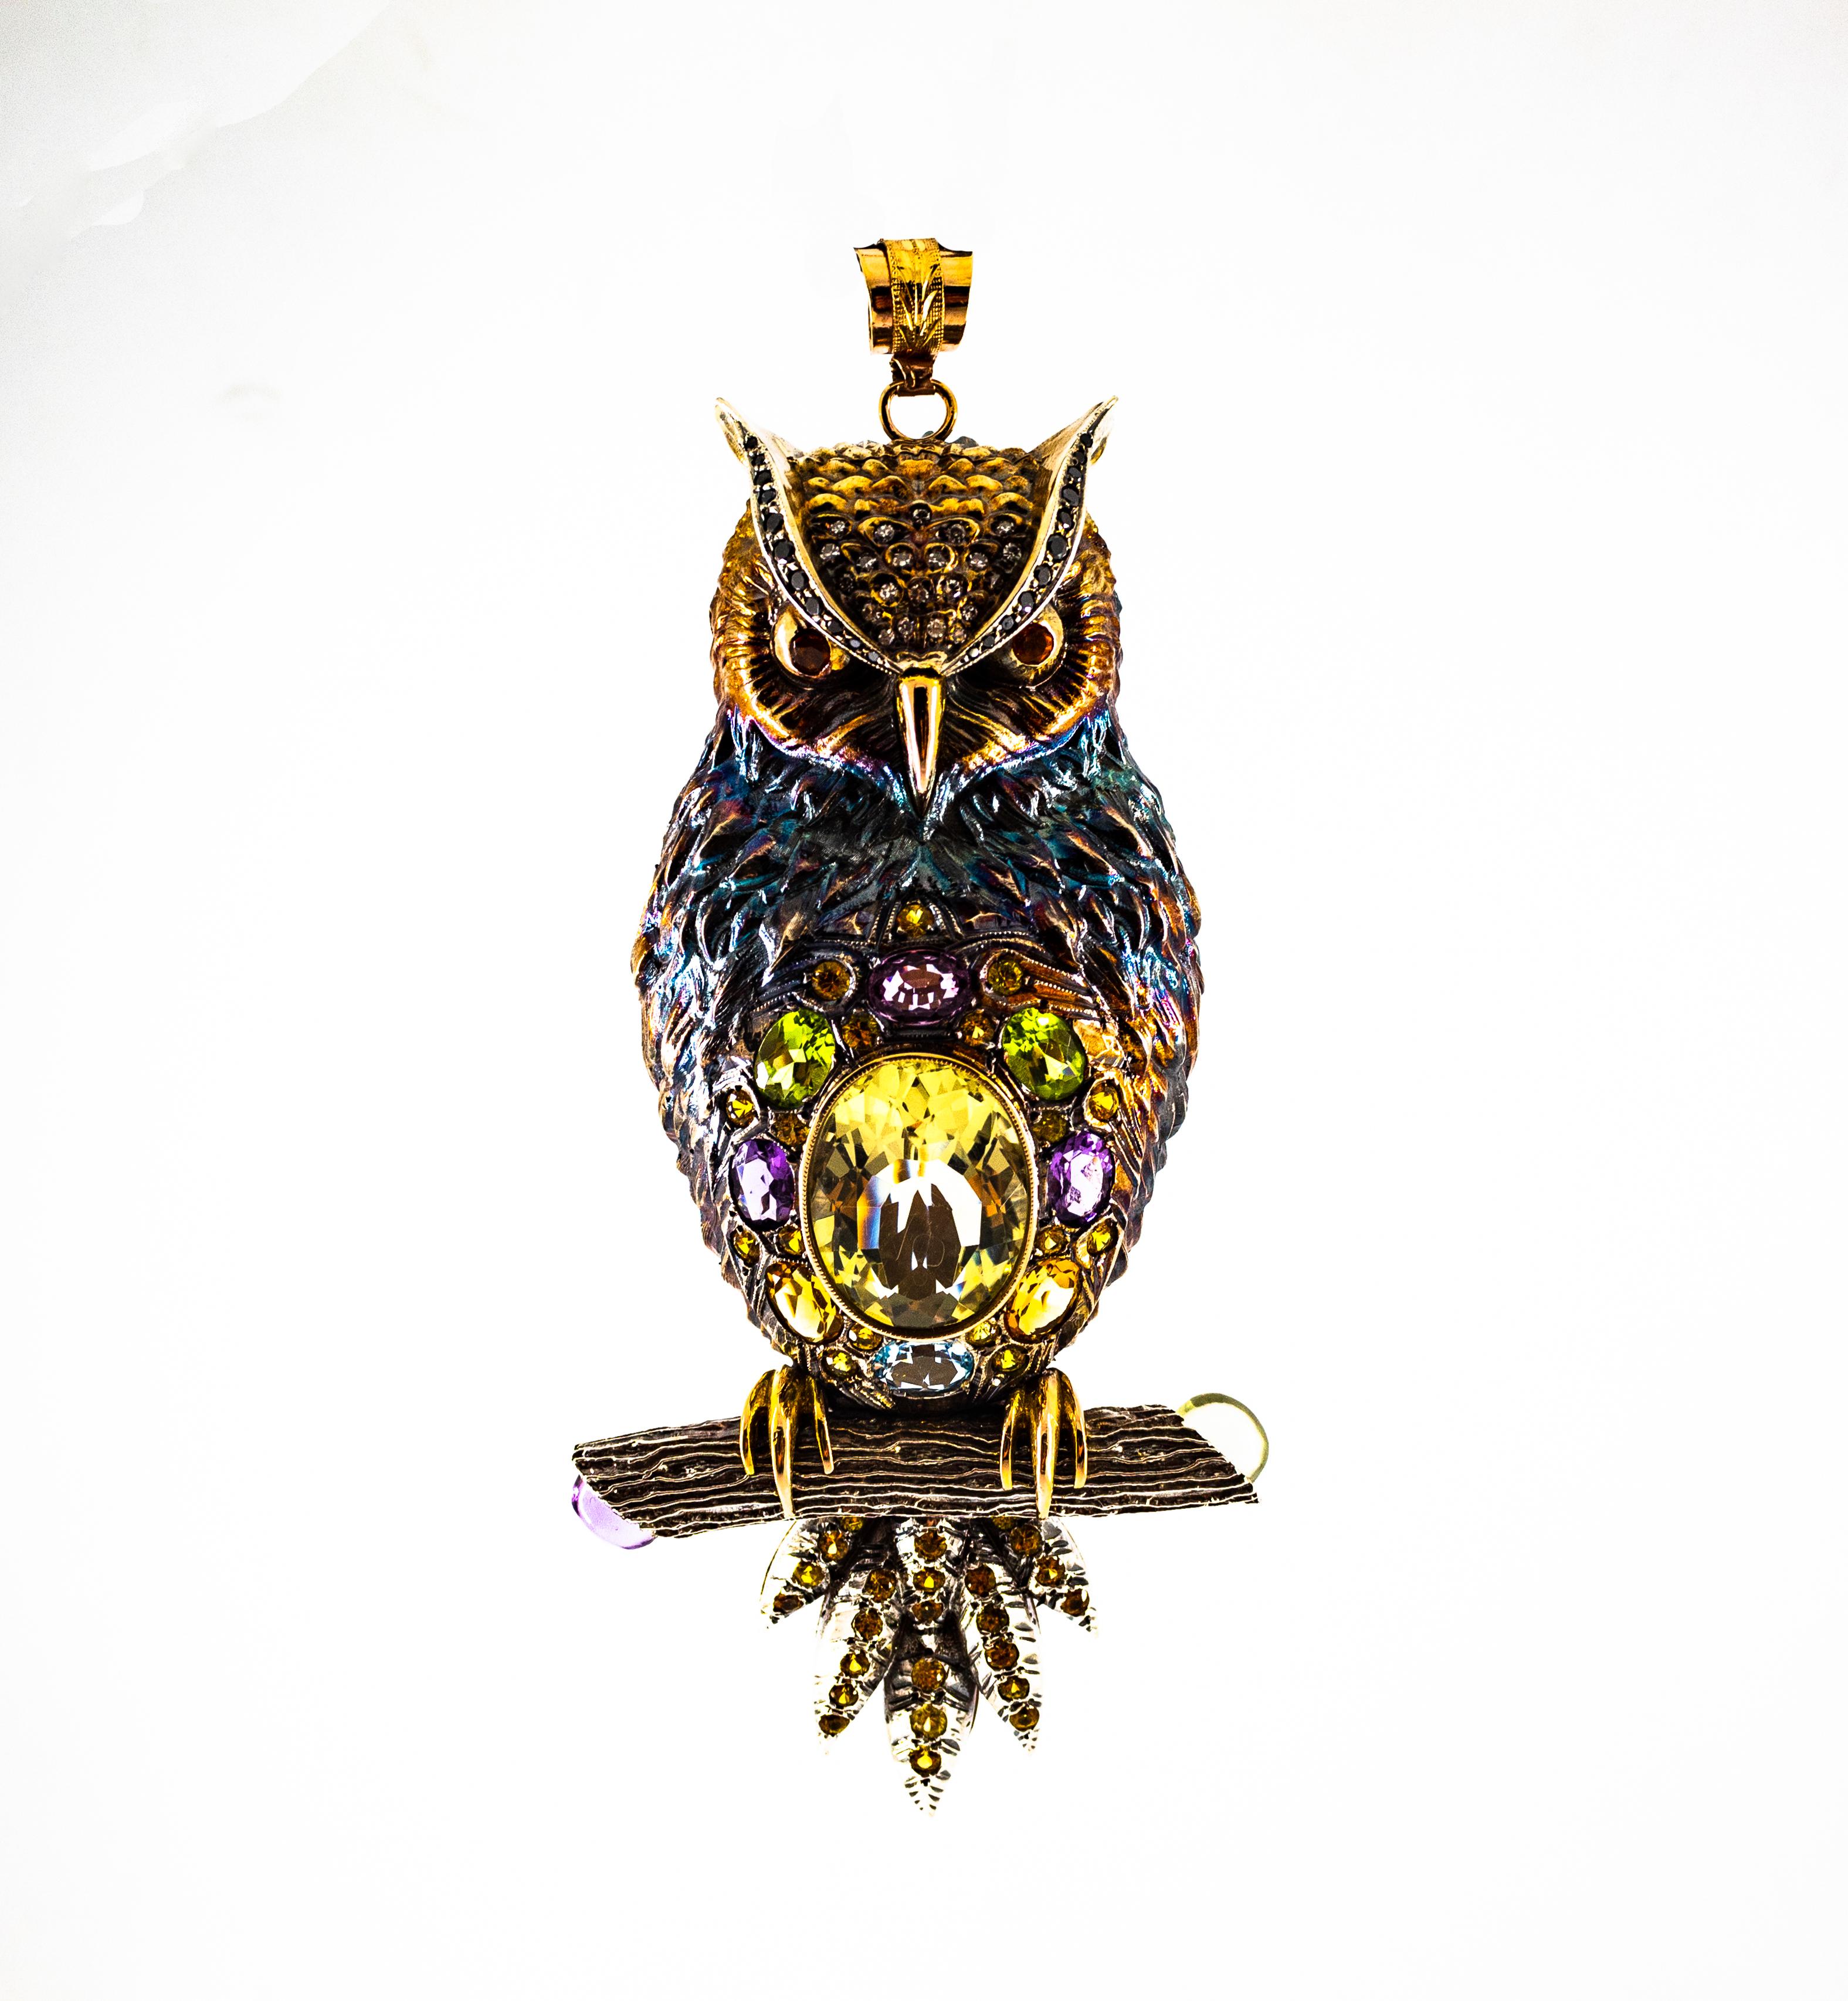 This Pendant is made of 9K Yellow Gold and Sterling Silver.
This Pendant has 0.33 Carats of White Diamonds.
This Pendant has 0.35 Carats of Black Diamonds.
This Pendant has 2.30 Carats of Yellow Sapphires.
This Pendant has a 16.00 Carats